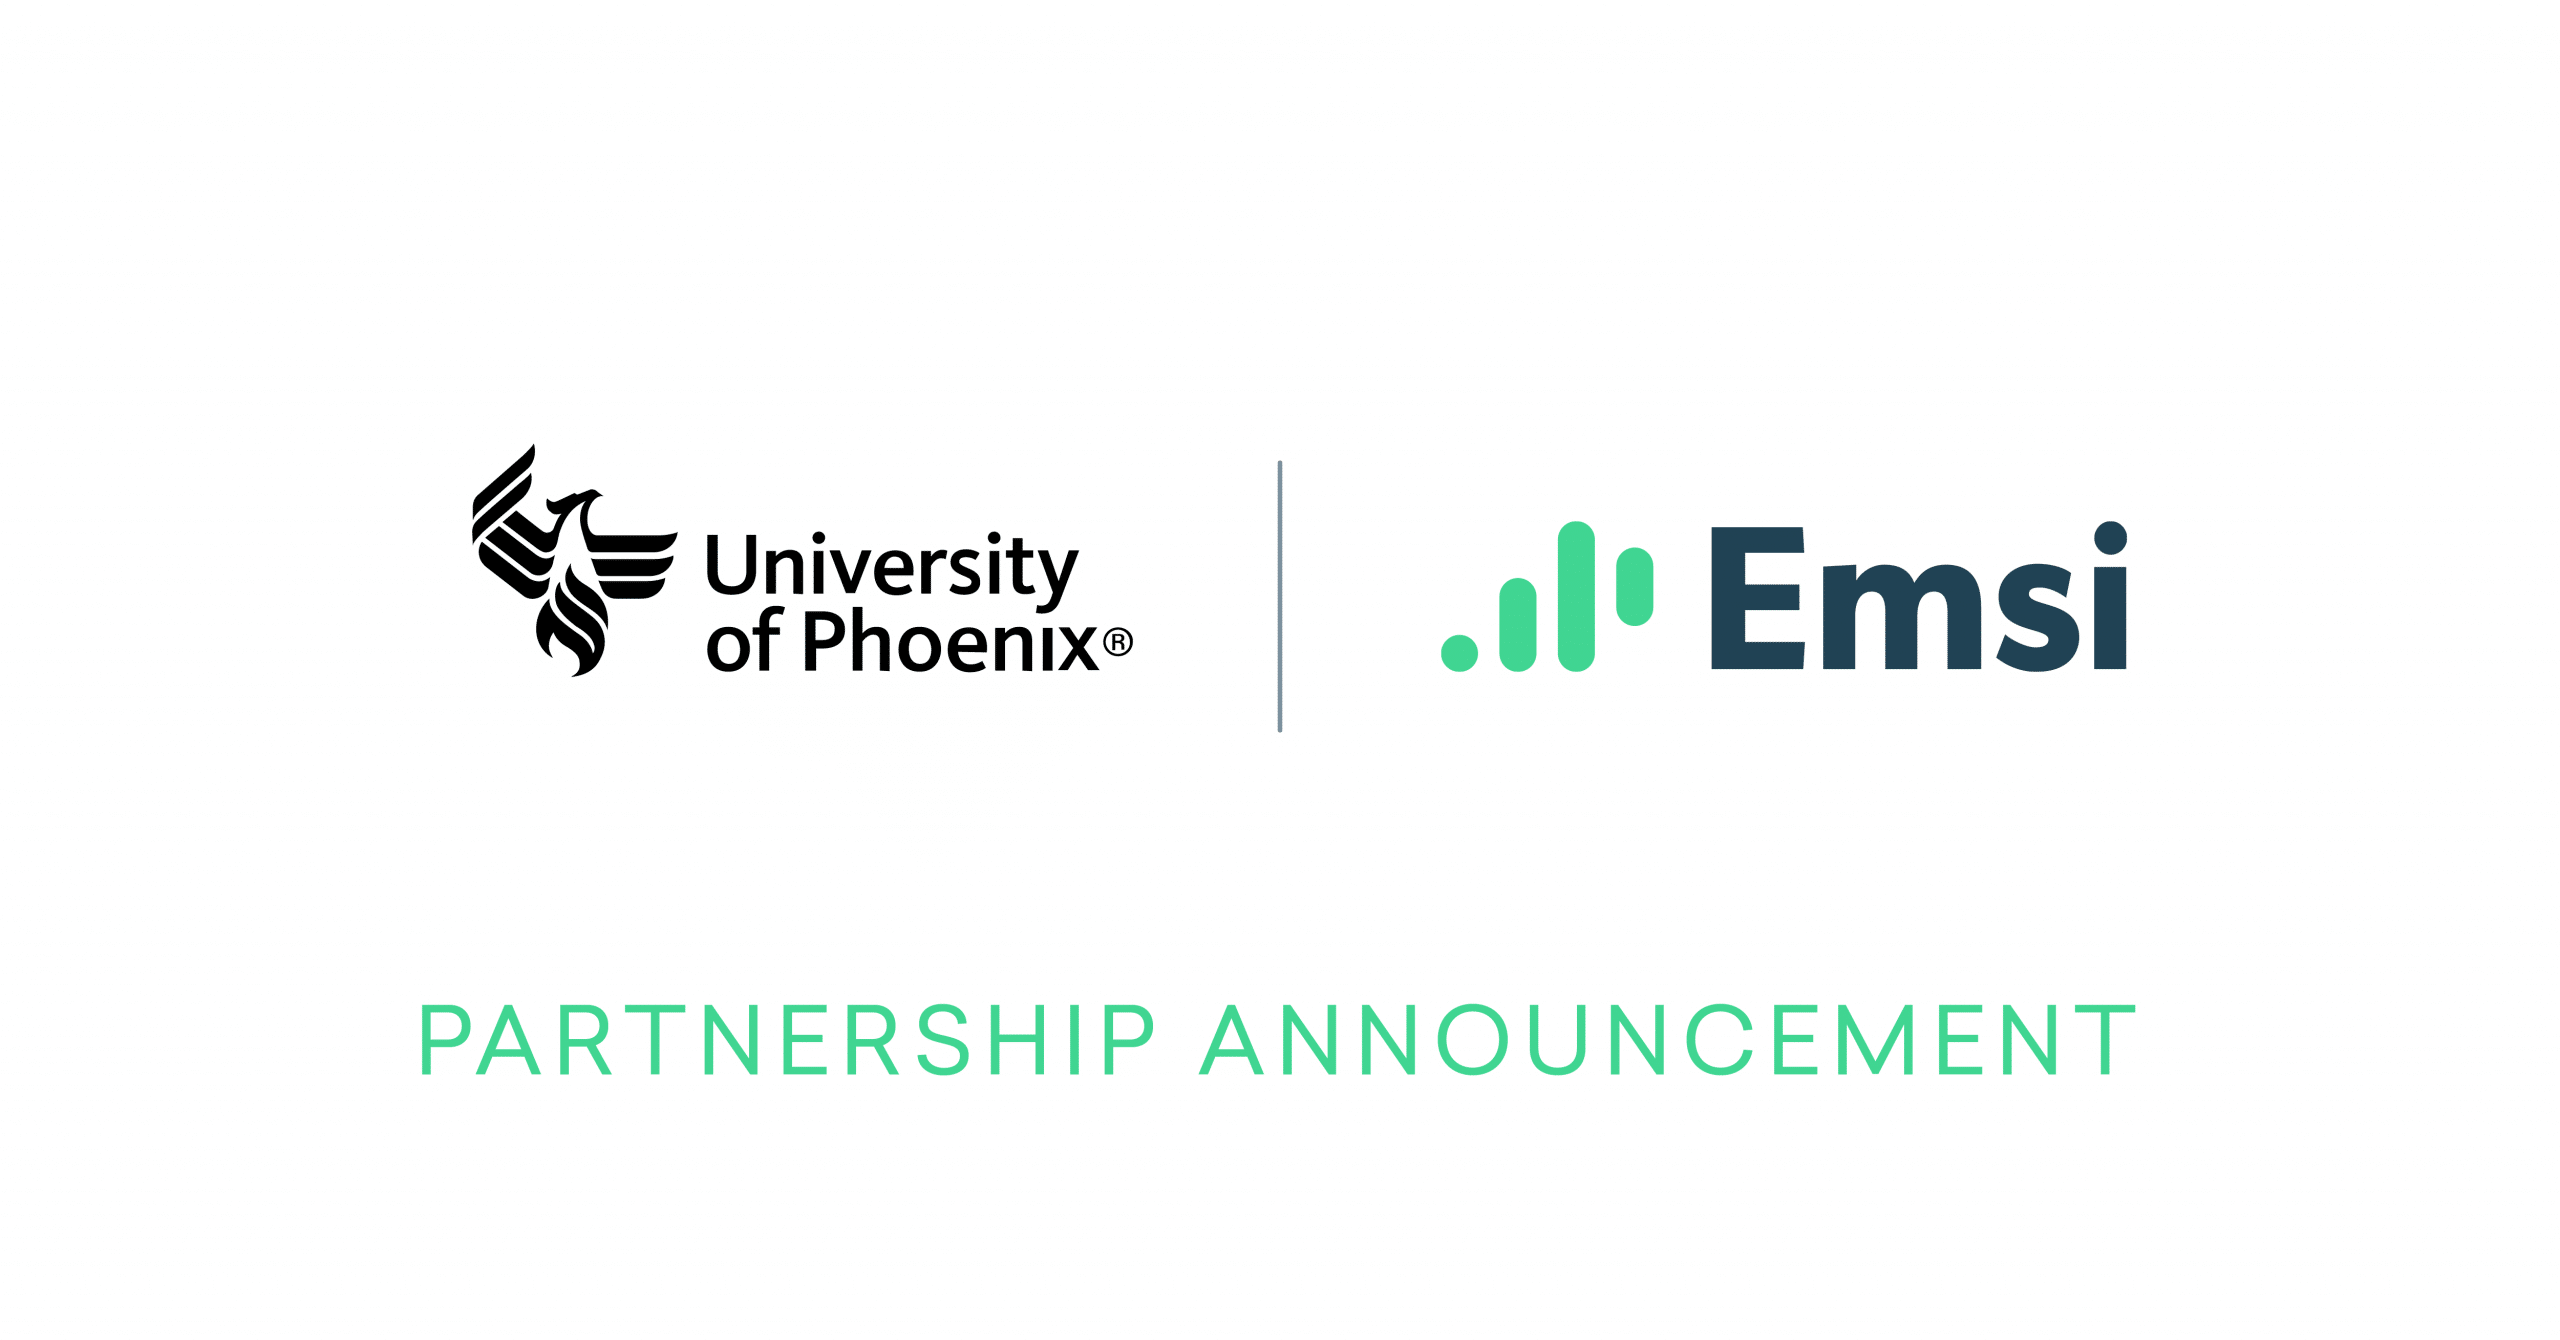 University of Phoenix Partners with Emsi to Map Skills from Classroom to Workplace